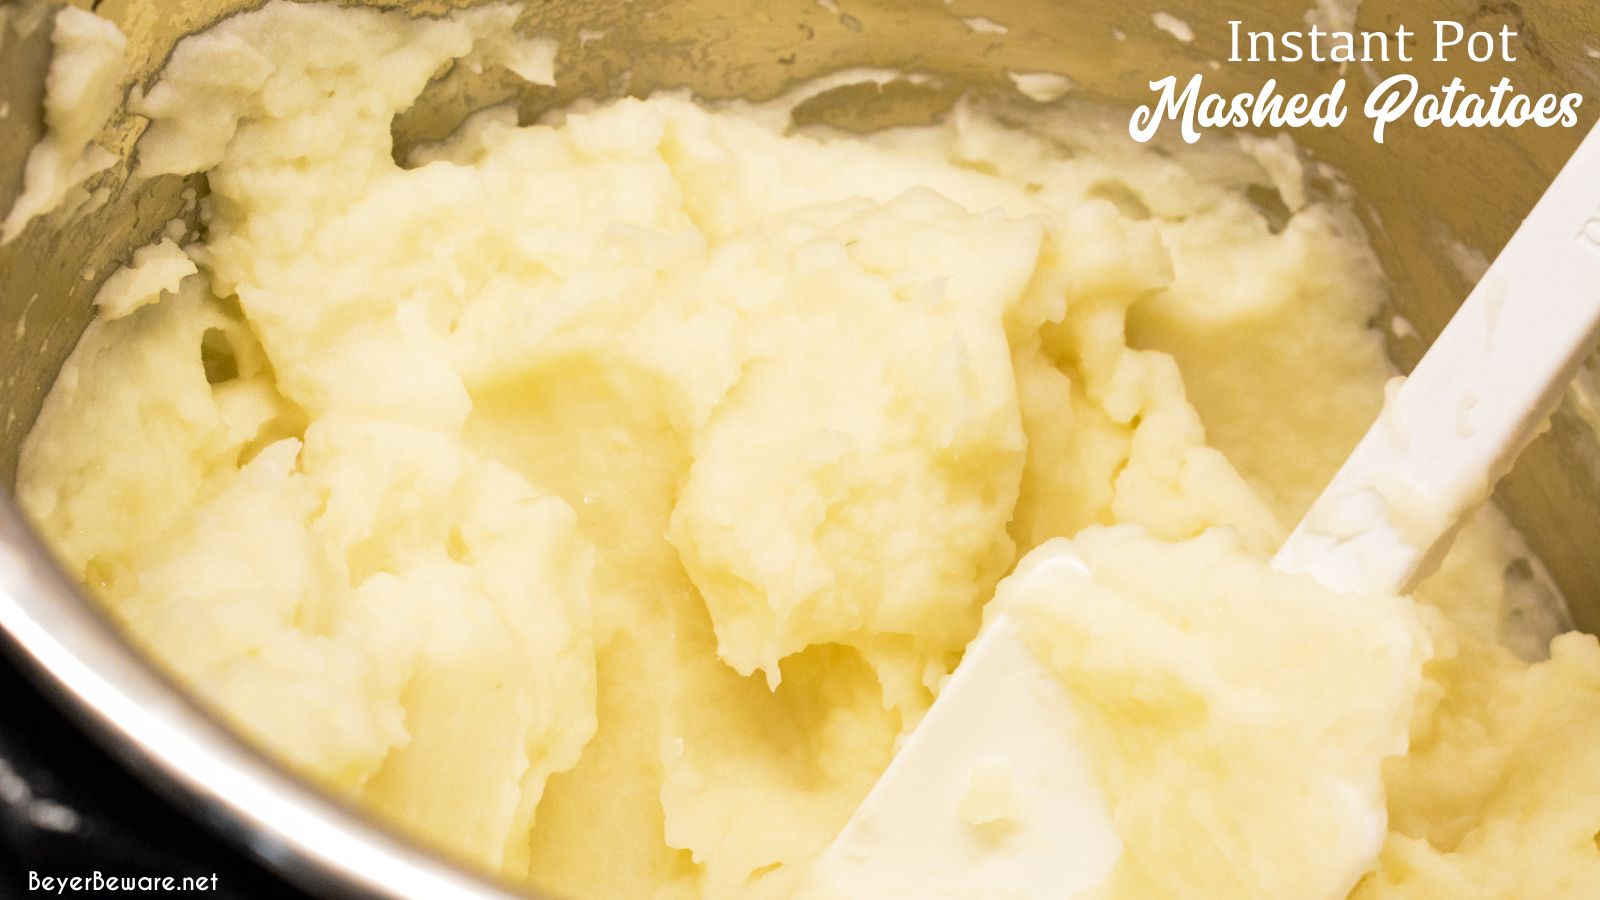 How to make mashed potatoes in the Instant Pot is something everyone who owns an instant pot should know how to do since it is the fastest and easiest way to make creamy mashed potatoes.